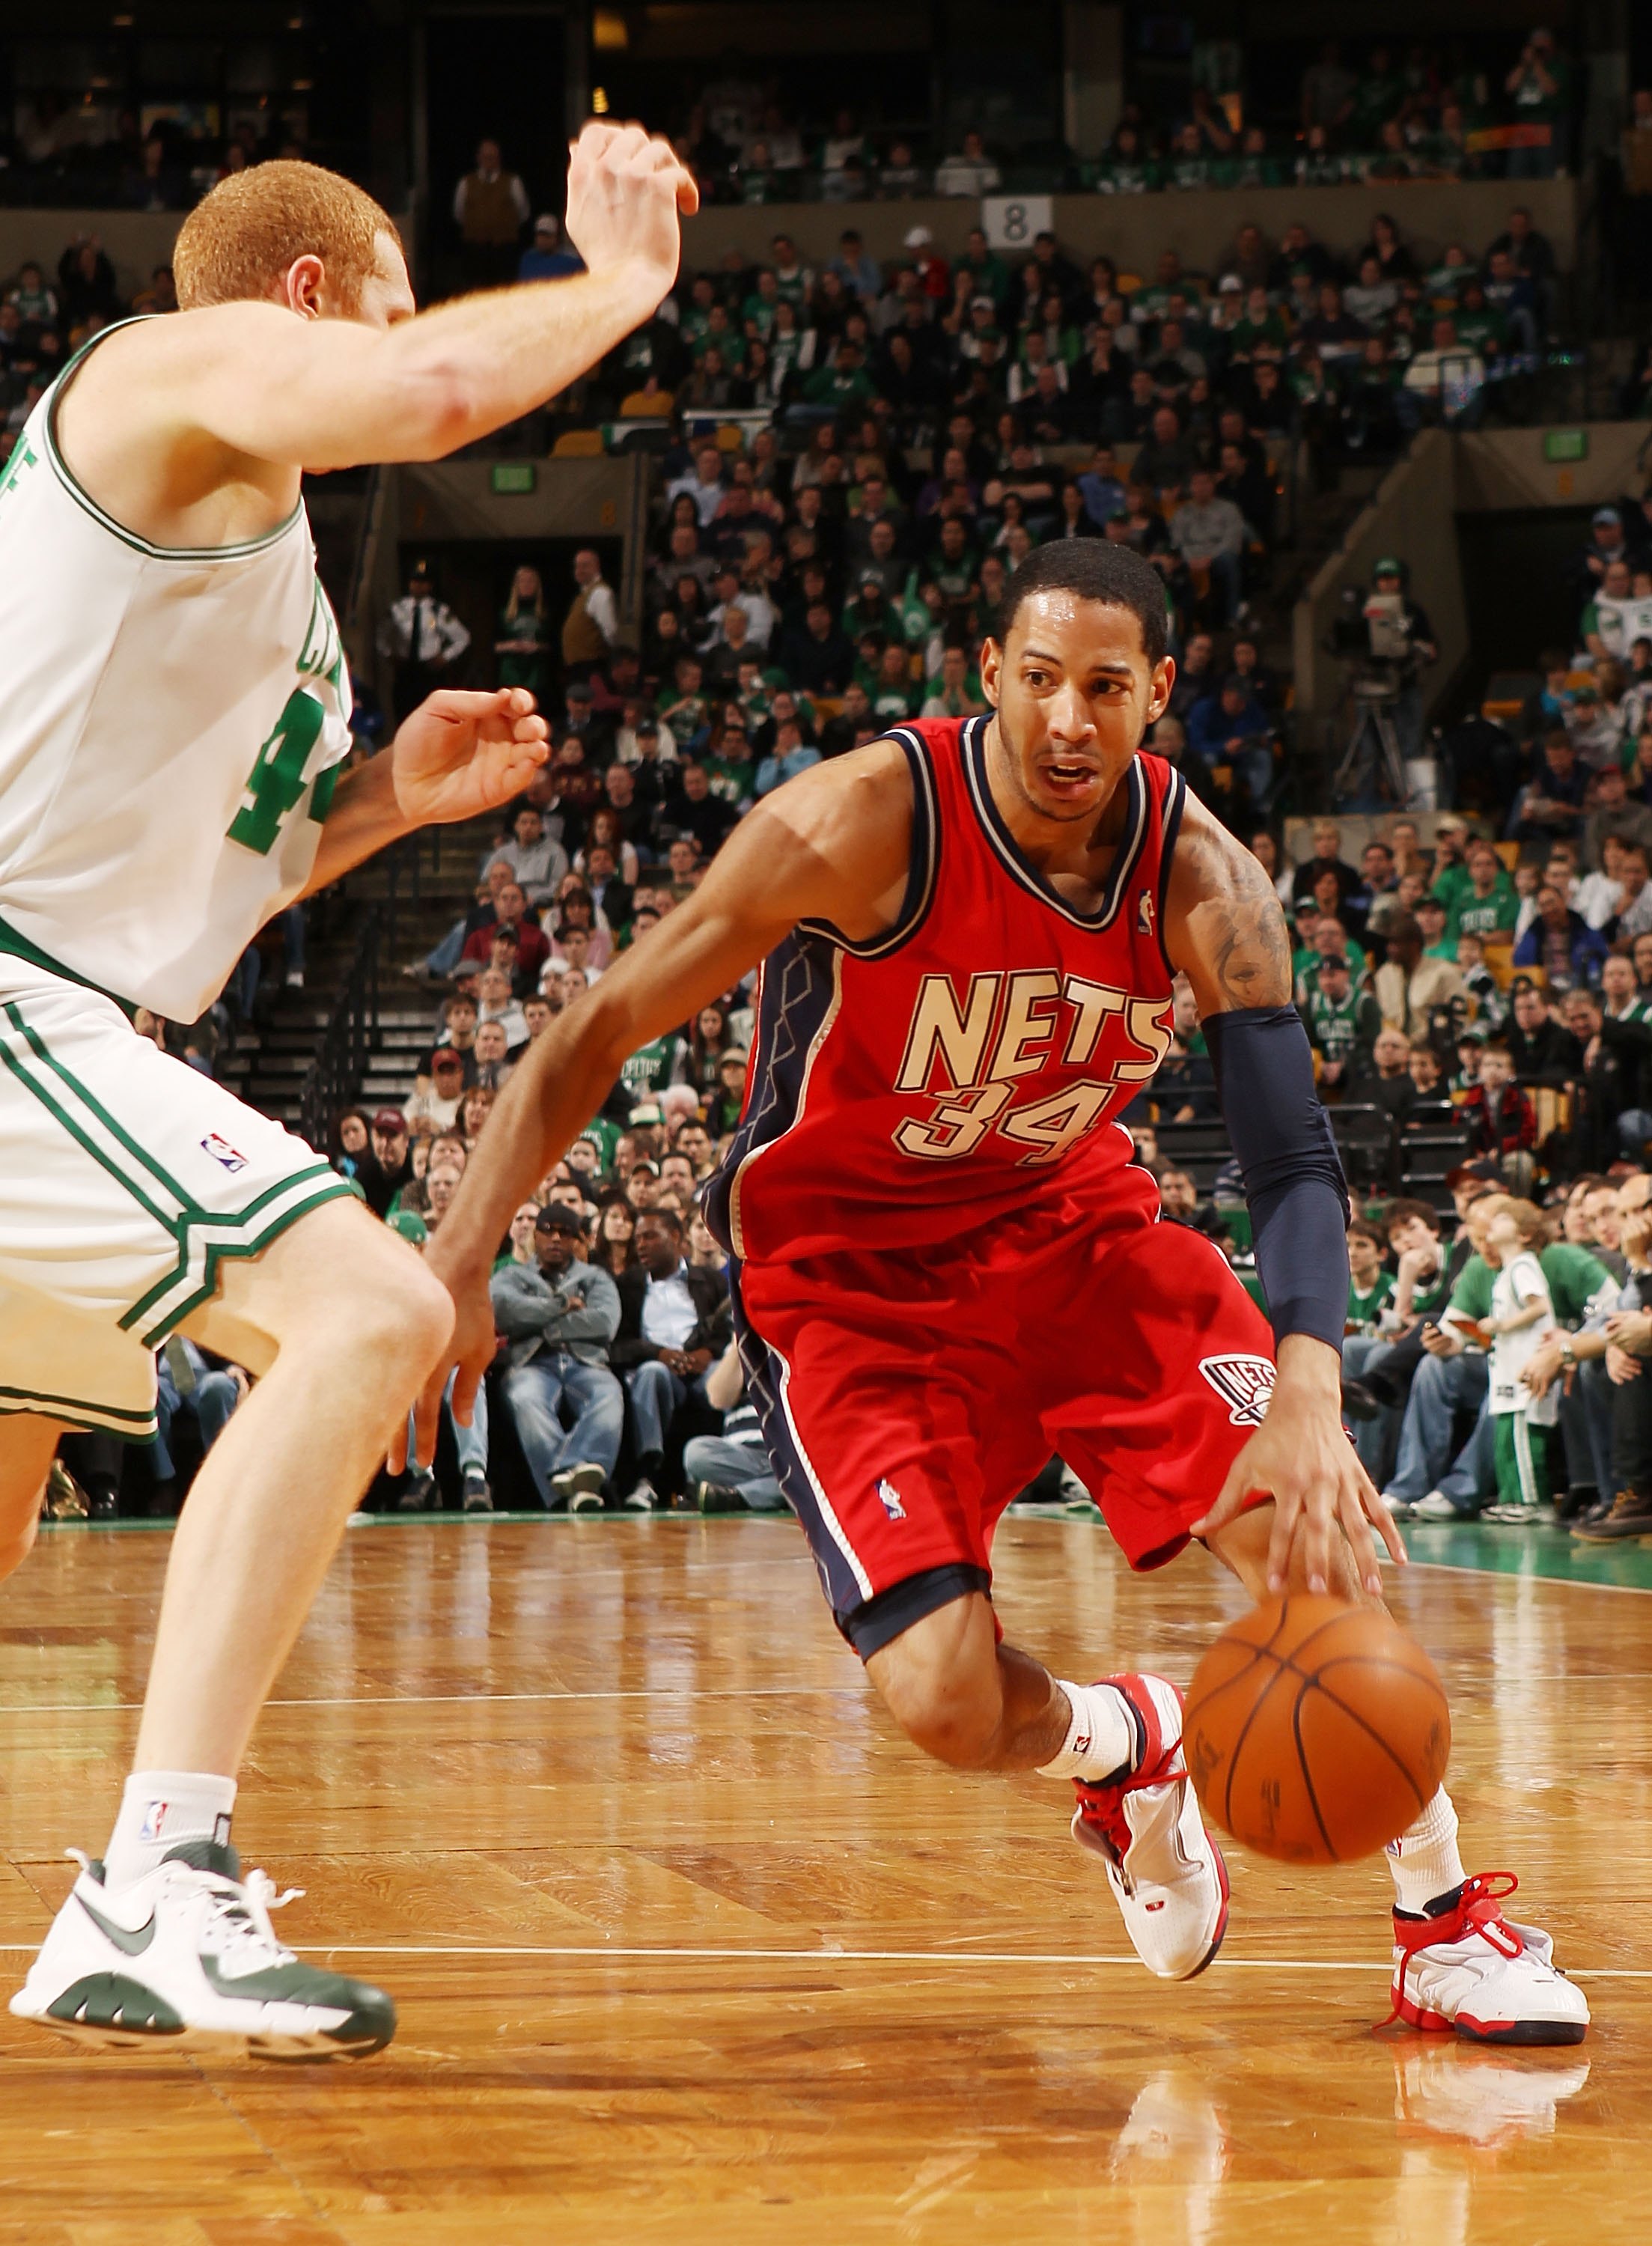 BOSTON - FEBRUARY 27:  Devin Harris #34 of the New Jersey Nets drives to the net as Brian Scalabrine #44 of the Boston Celtics defends at the TD Garden on February 27, 2010 in Boston, Massachusetts. The Nets defeated the Celtics 104-96.  NOTE TO USER: Use